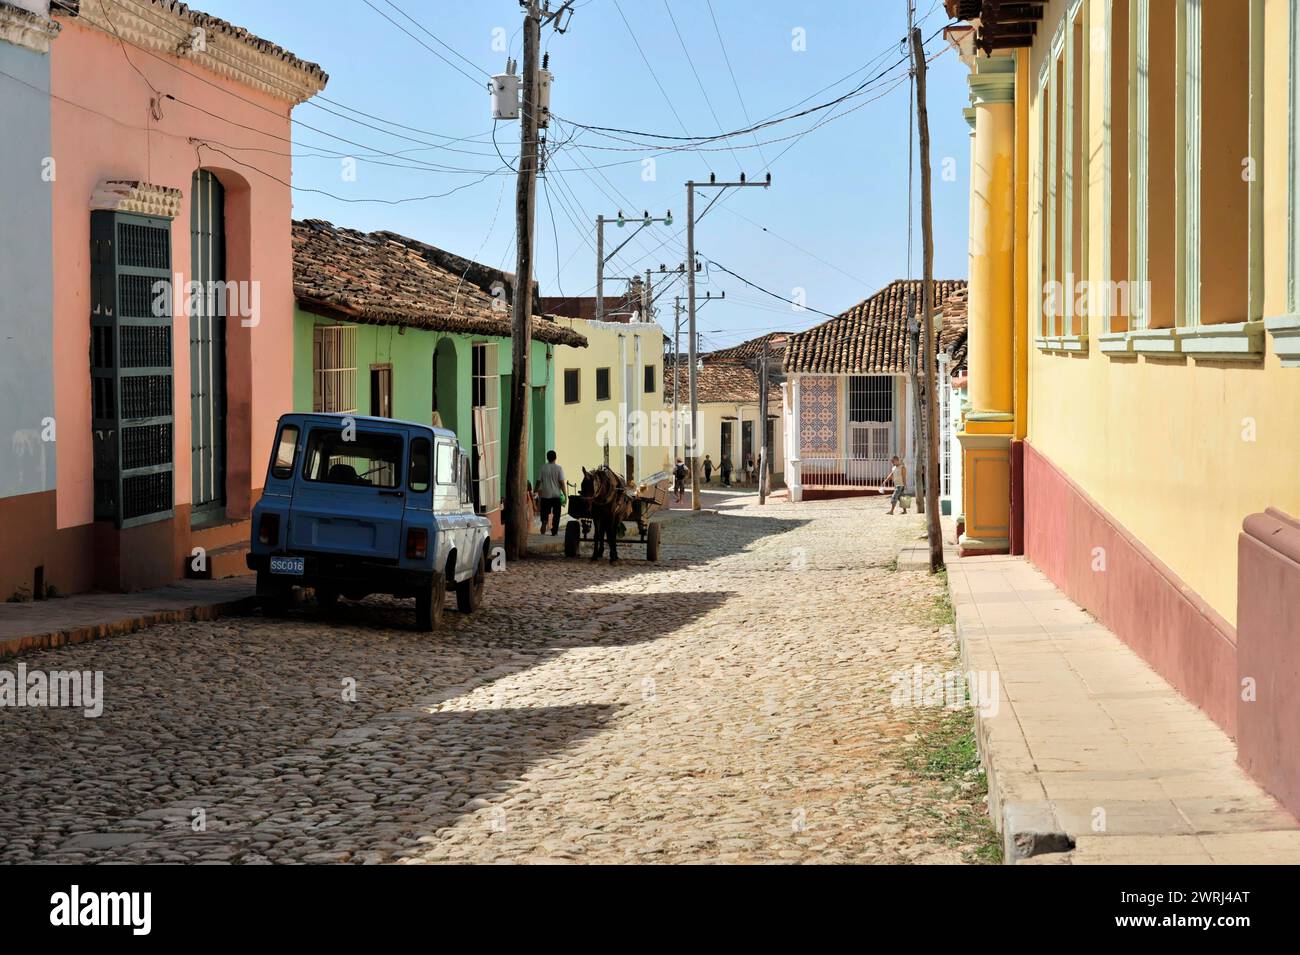 Historic city street with colourful buildings and cobblestones, Trinidad, Cuba, Central America Stock Photo